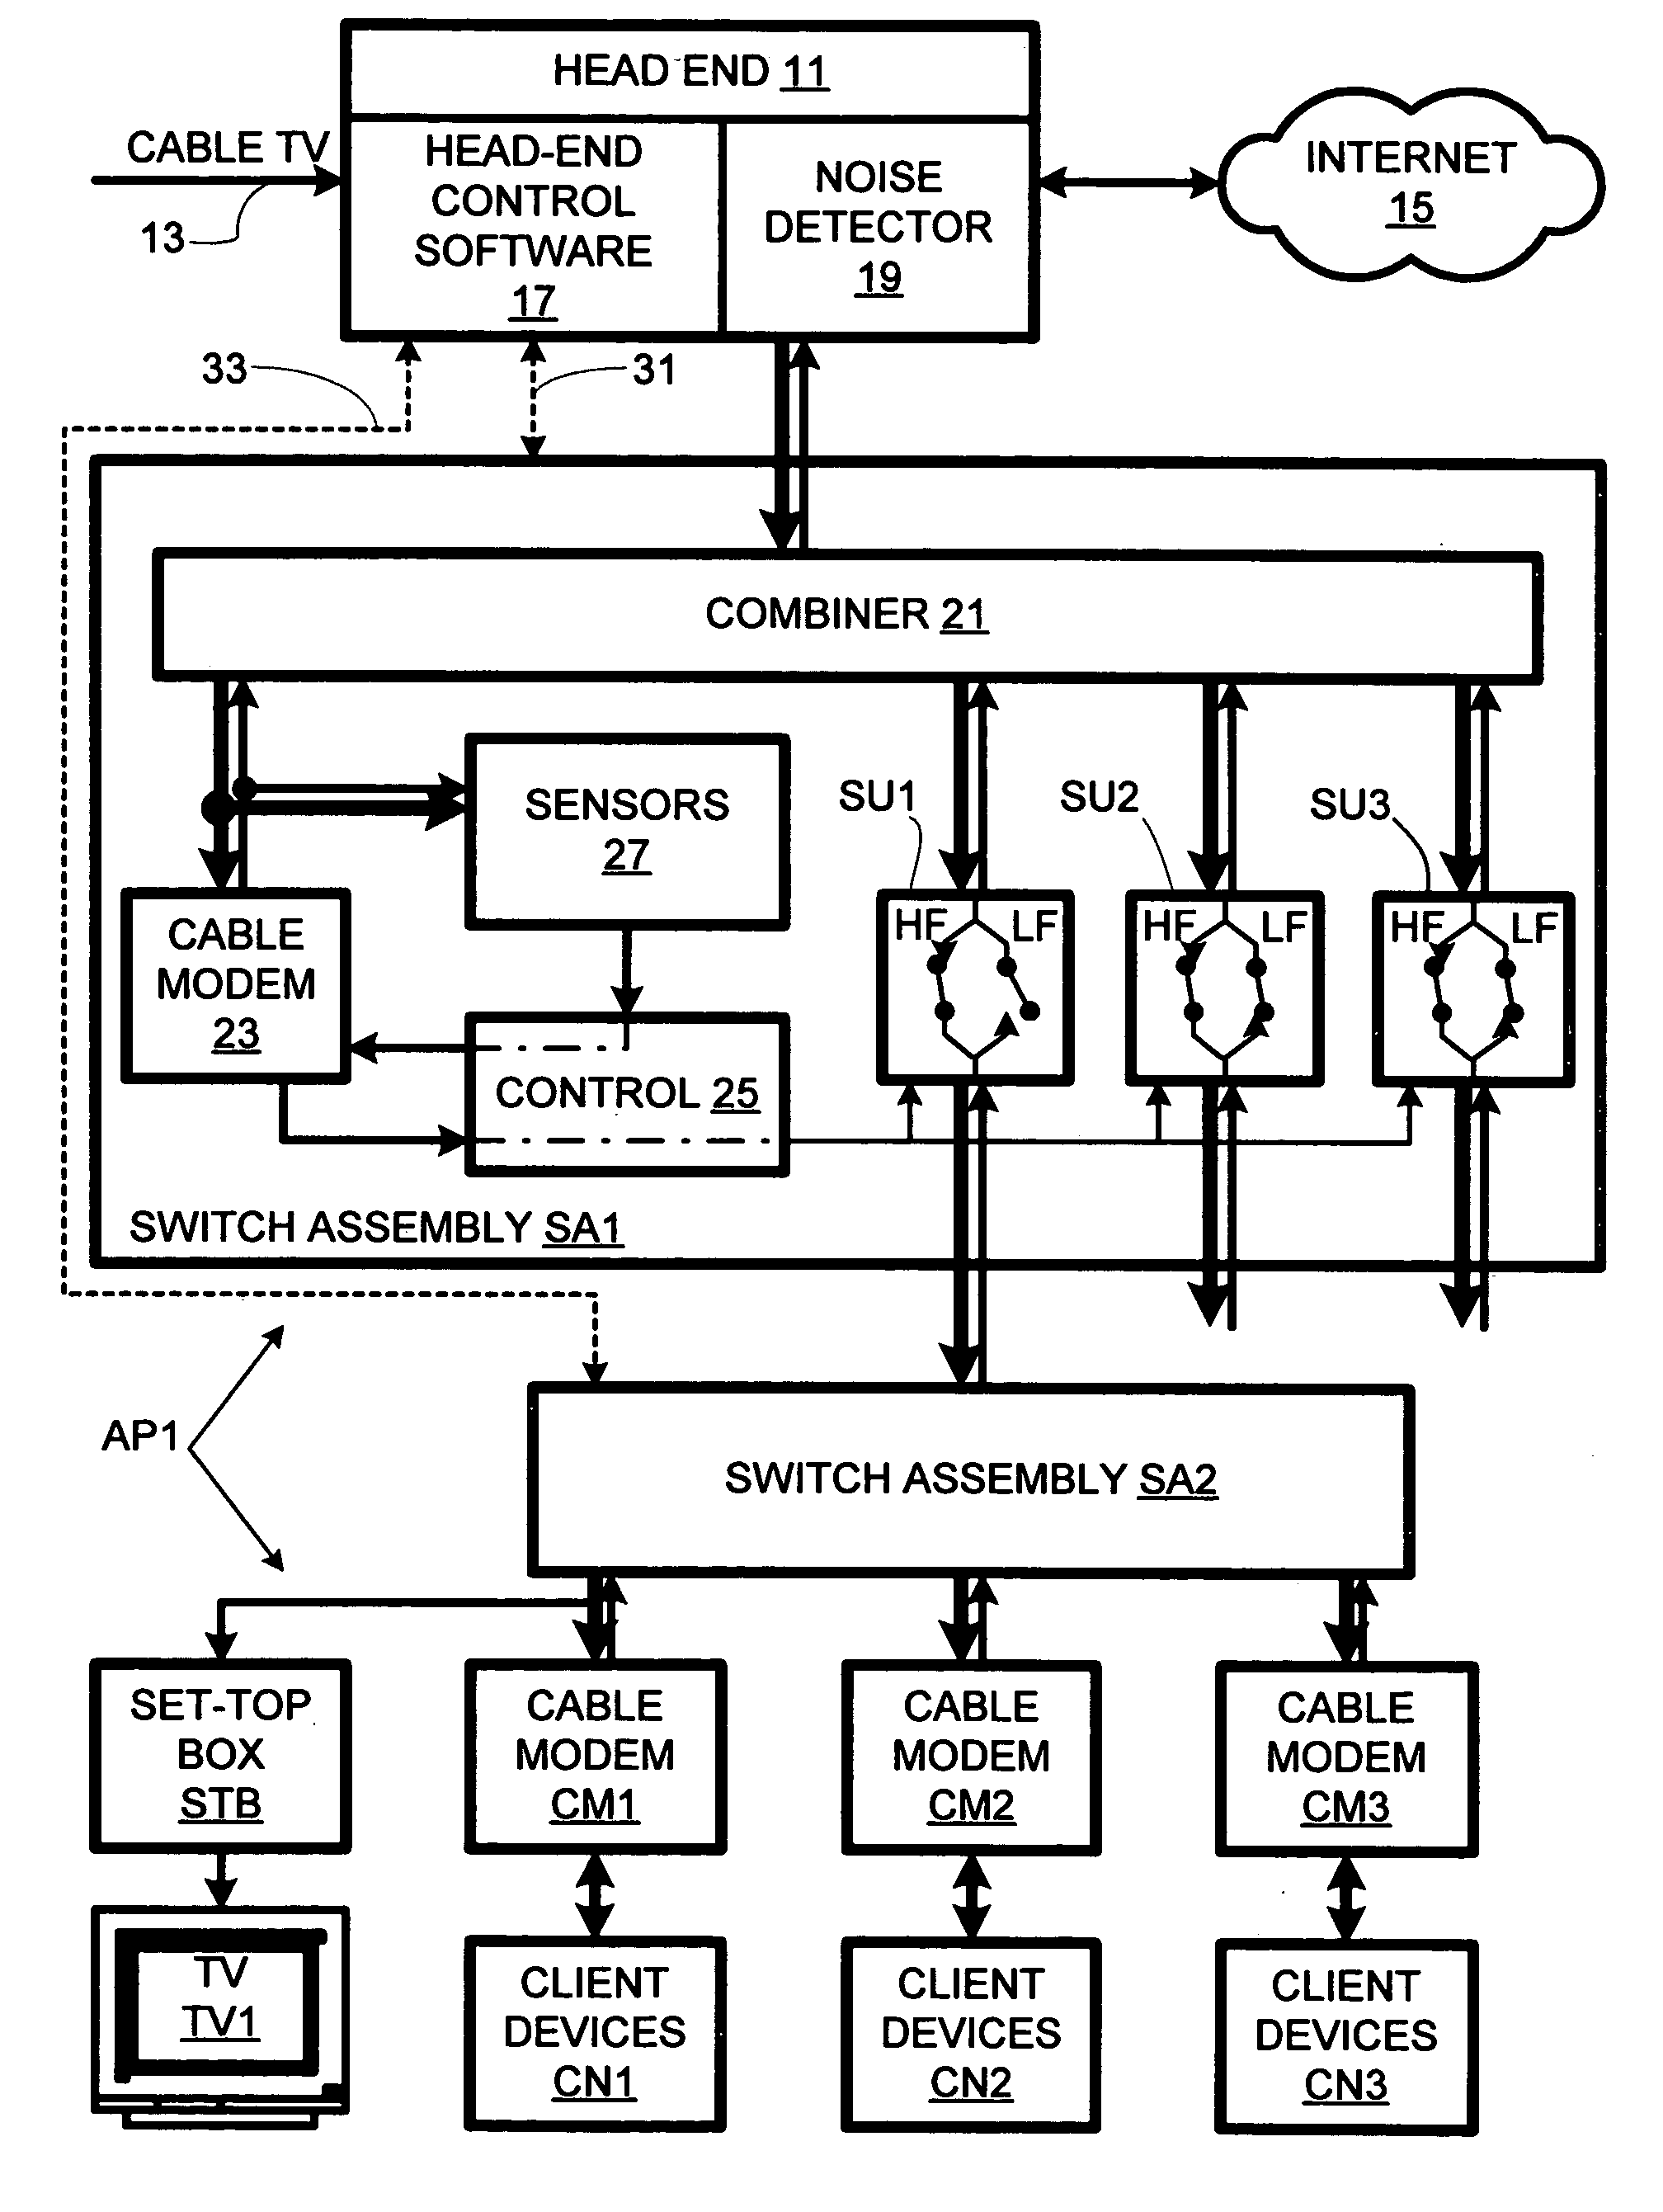 Hierarchical communications network with upstream signal controllable from head end